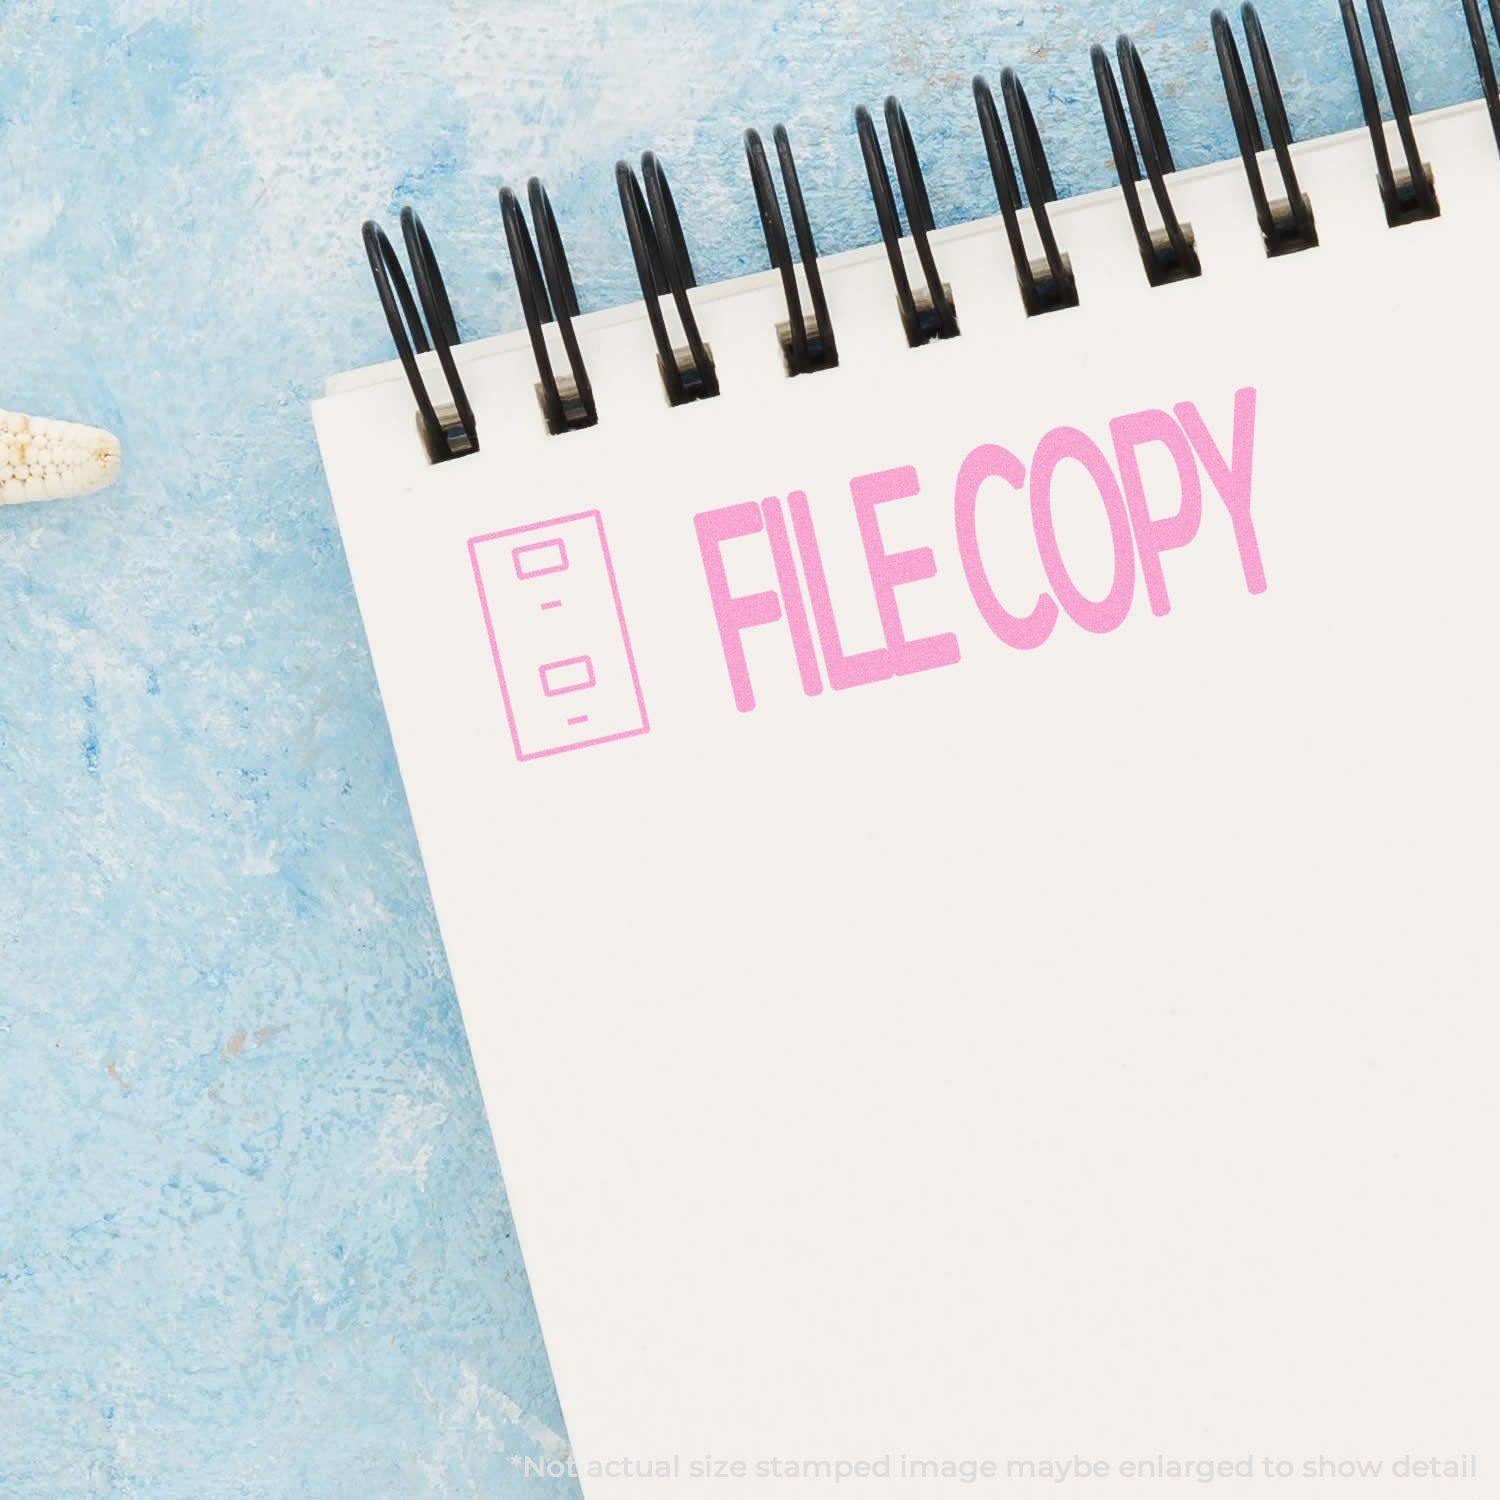 A self-inking stamp with a stamped image showing how the text "FILE COPY" in a large bold font with a small image of a drawer on the left side is displayed after stamping.